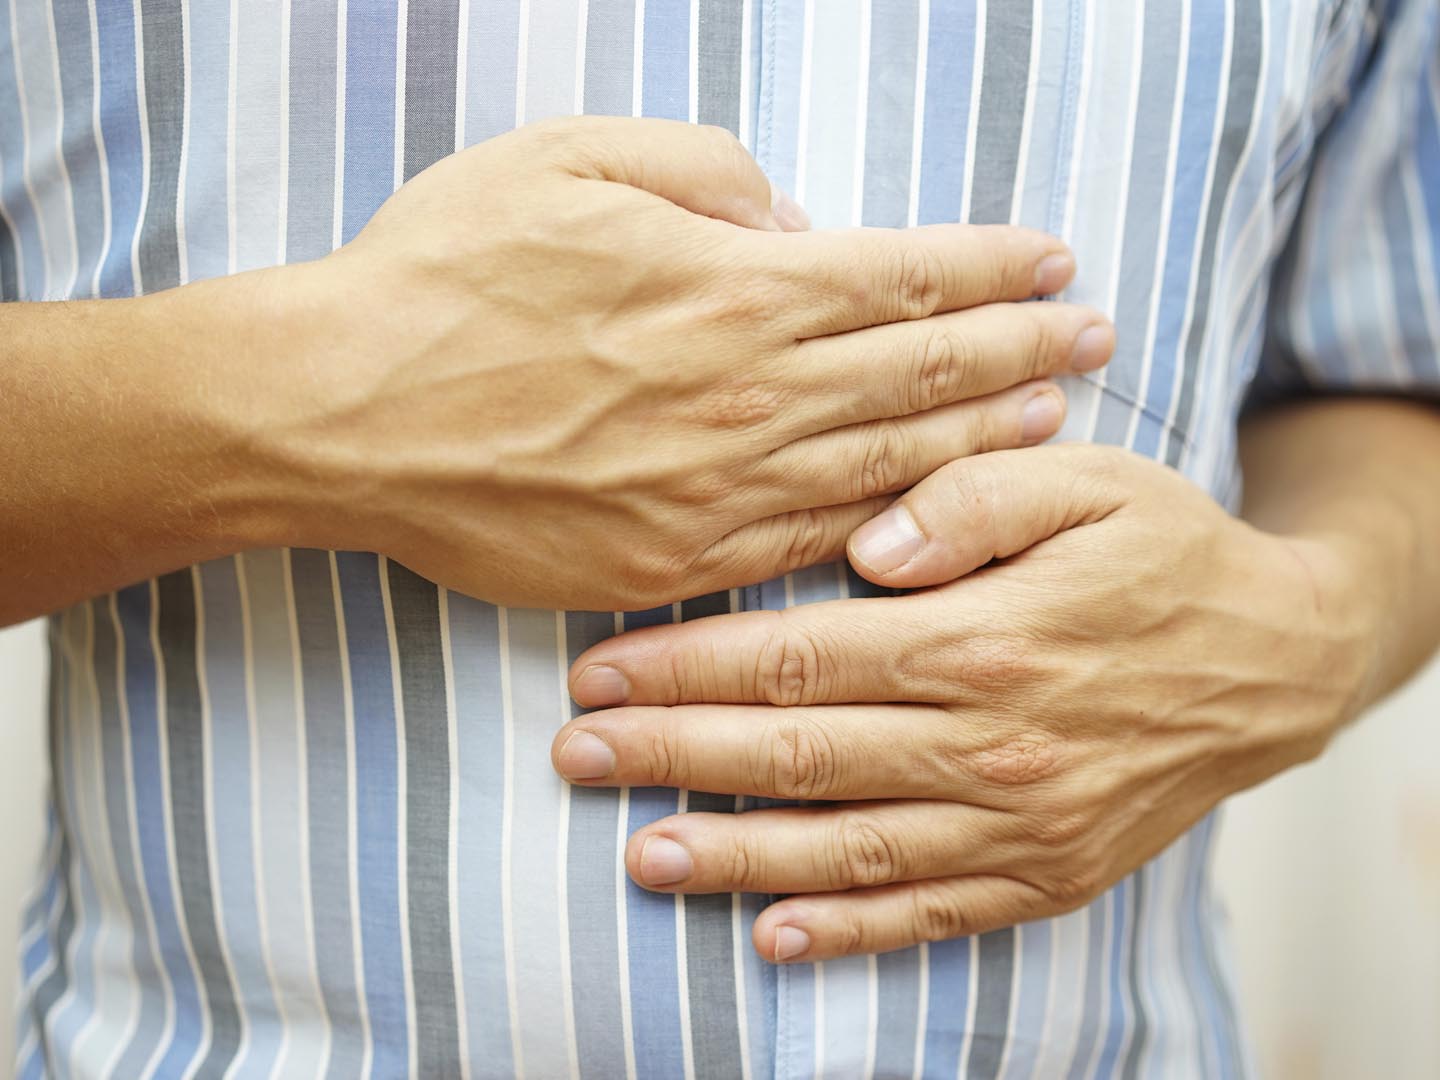 Stomach ache, man placing hands on the stomach, concept of .stomach ulcer